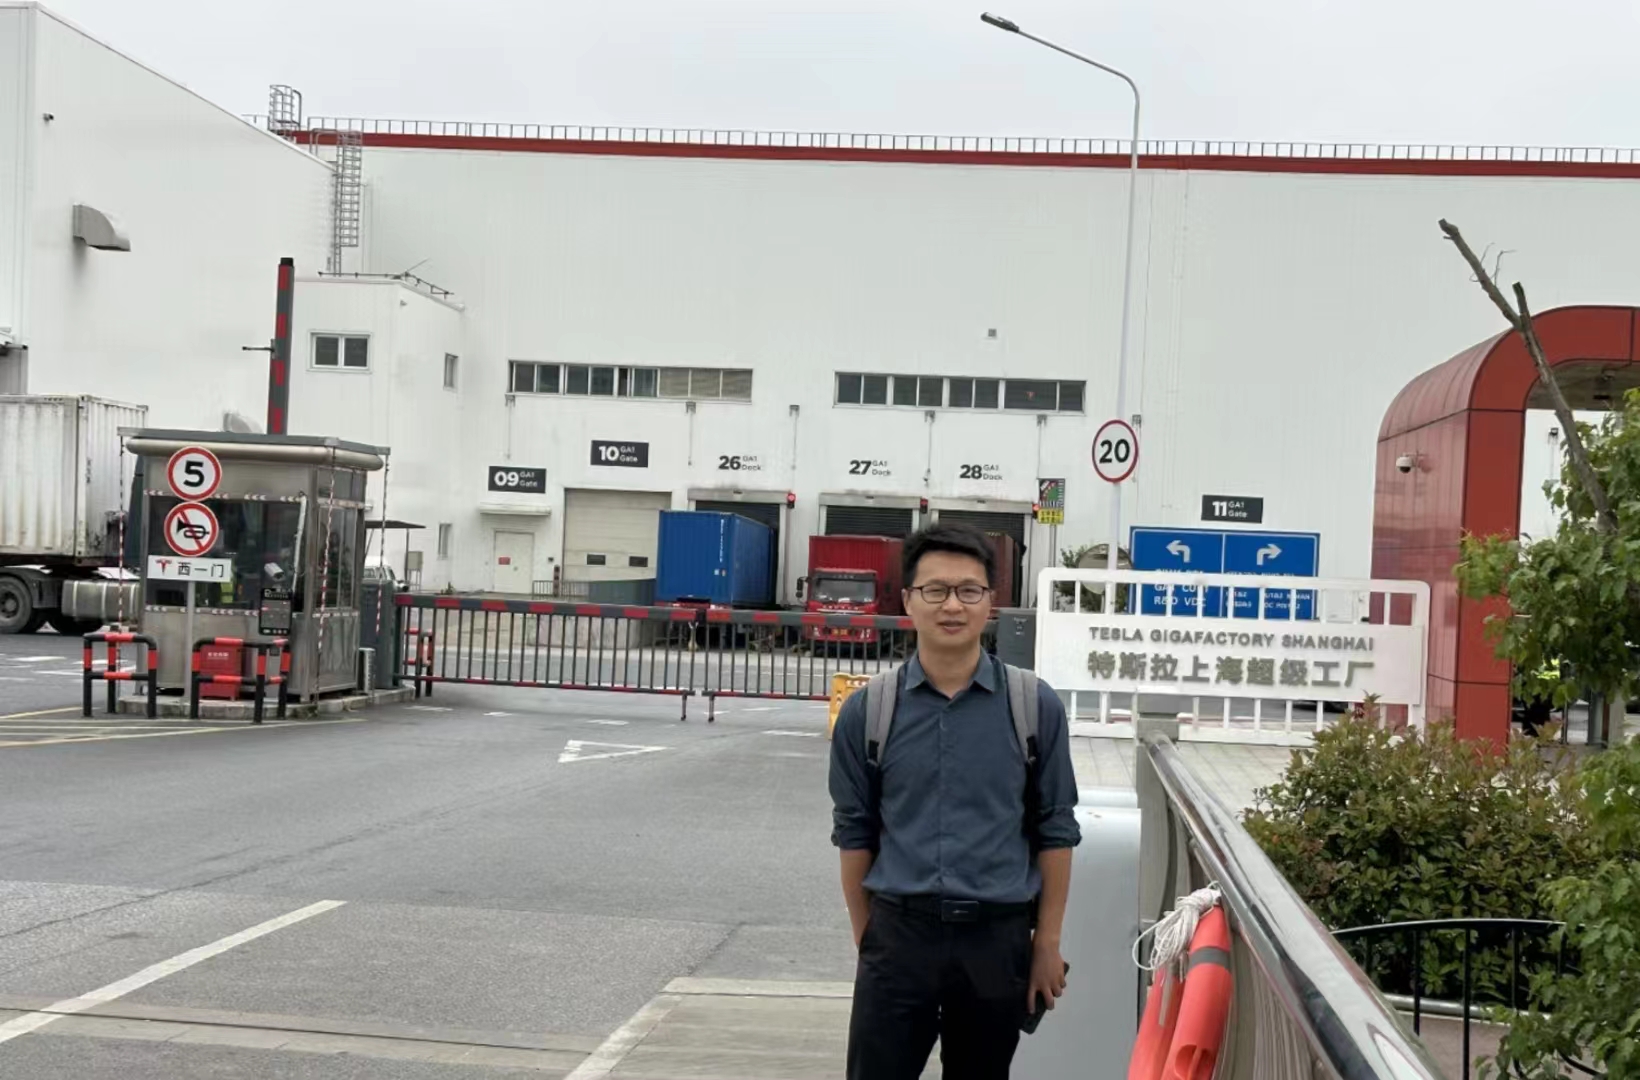 The trip to Shanghai Tesla Super Factory, YIHUI thermoforming hydraulic press machine inspection, the customer is very satisfied！